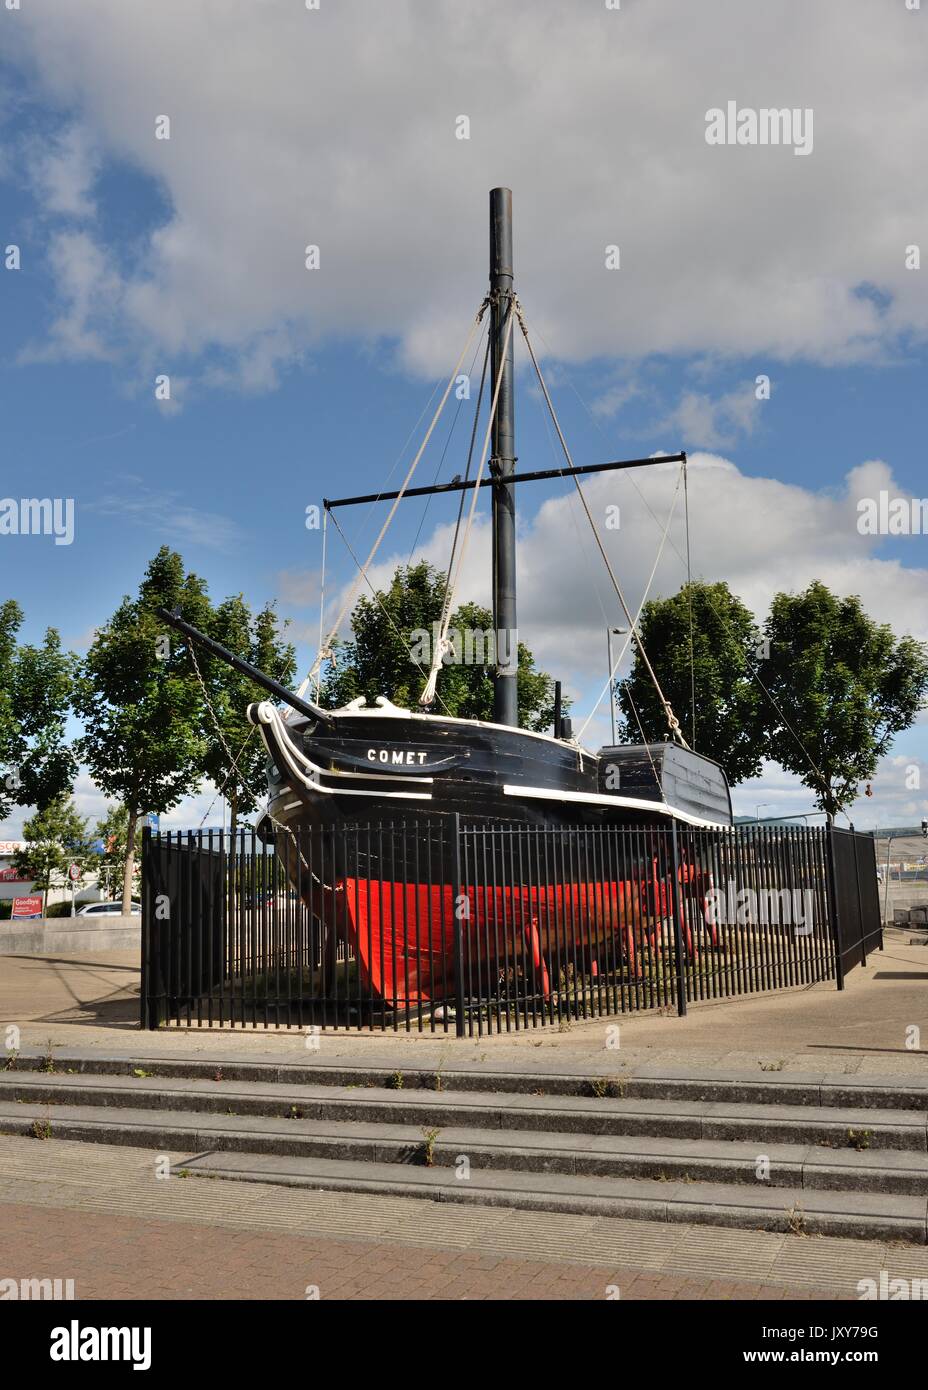 The replica 'PS Comet' Port Glasgow, Scotland. UK. The first commercially viable steamship in Europe provided a service from Greenock to Glasgow. Stock Photo